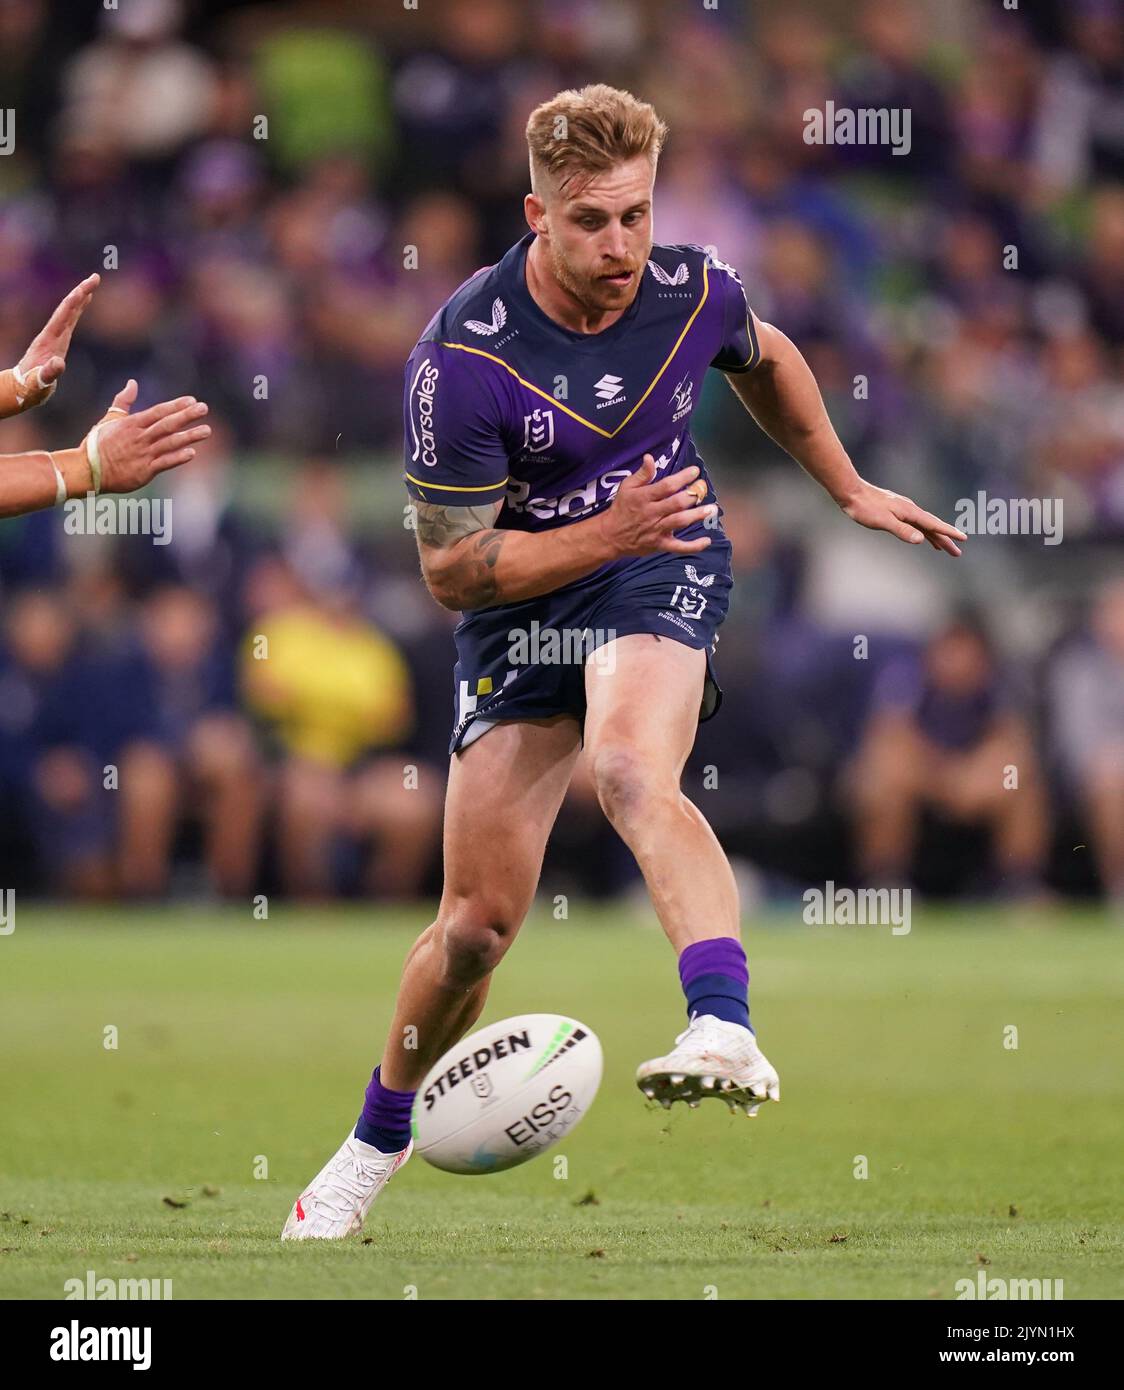 Cameron Munster of the Melbourne Storm runs with the ball during the Round  6 NRL match between the Melbourne Storm and Sydney Roosters at AAMI Park in  Melbourne, Friday, April 16, 2021. (